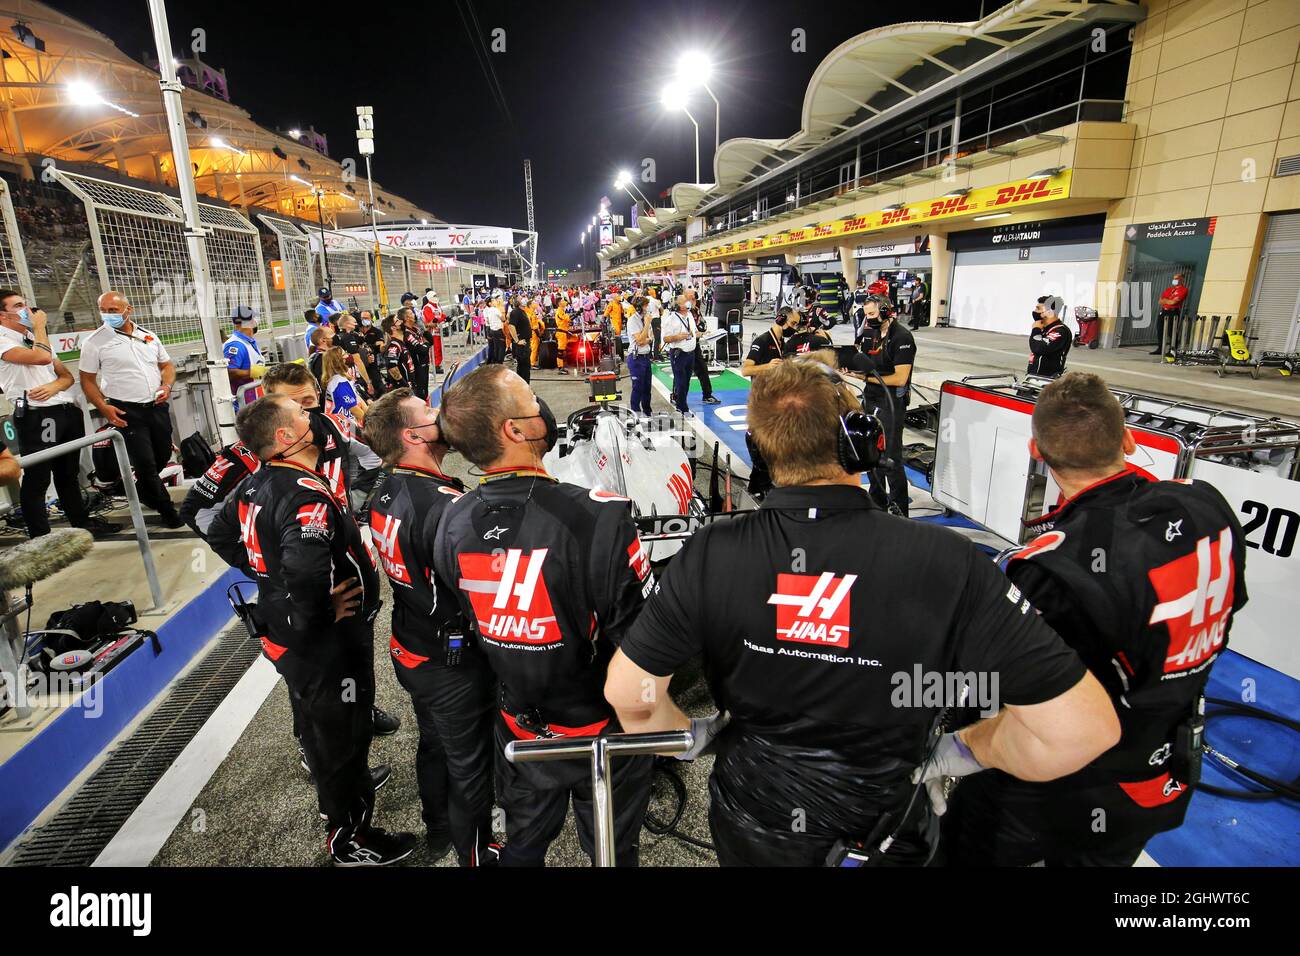 Haas F1 Team mechanics in the pits while the race is stopped watch a replay of the crash suffered by Romain Grosjean (FRA) Haas F1 Team at the start of the race.